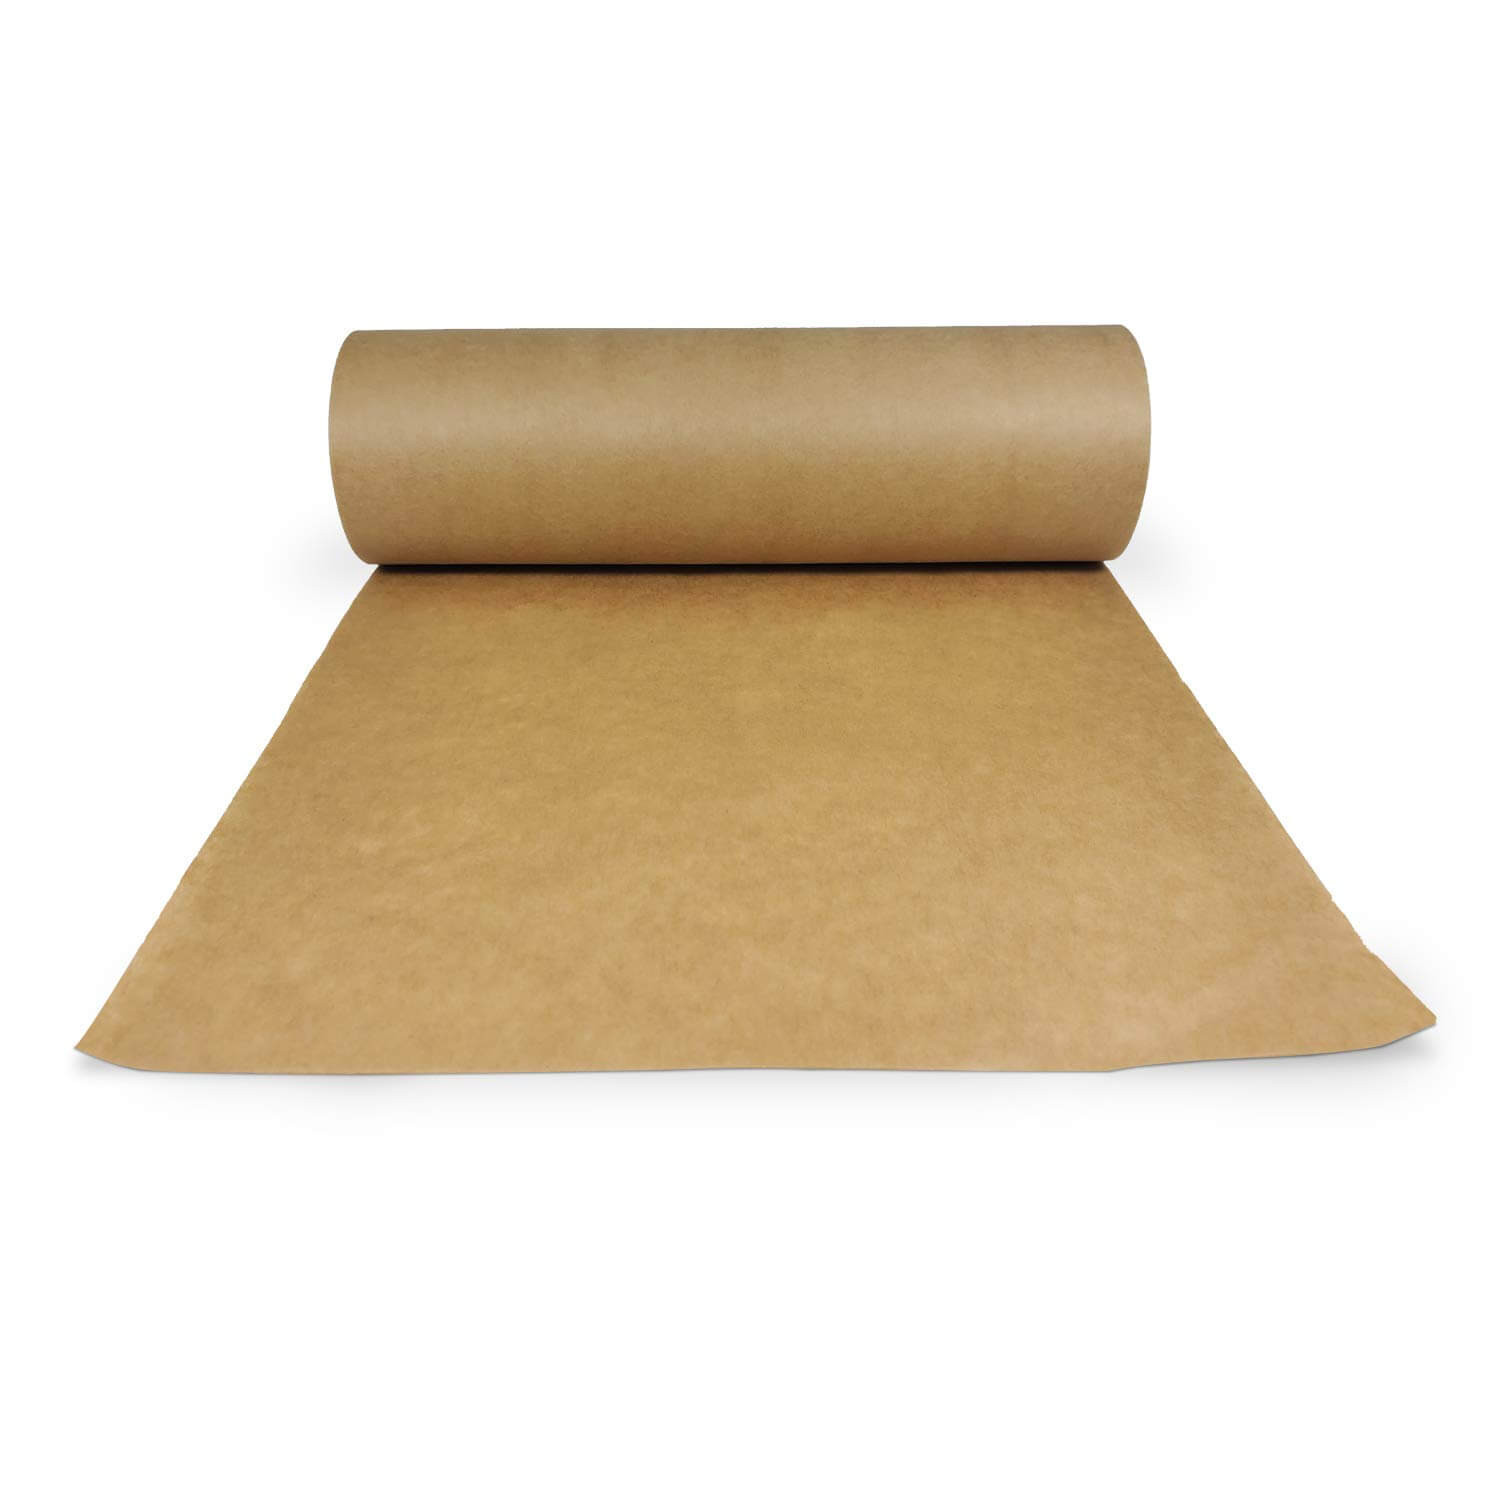 Set of 12 x 60 Yards Brown Masking Paper Roll and 1 1/2 x 60